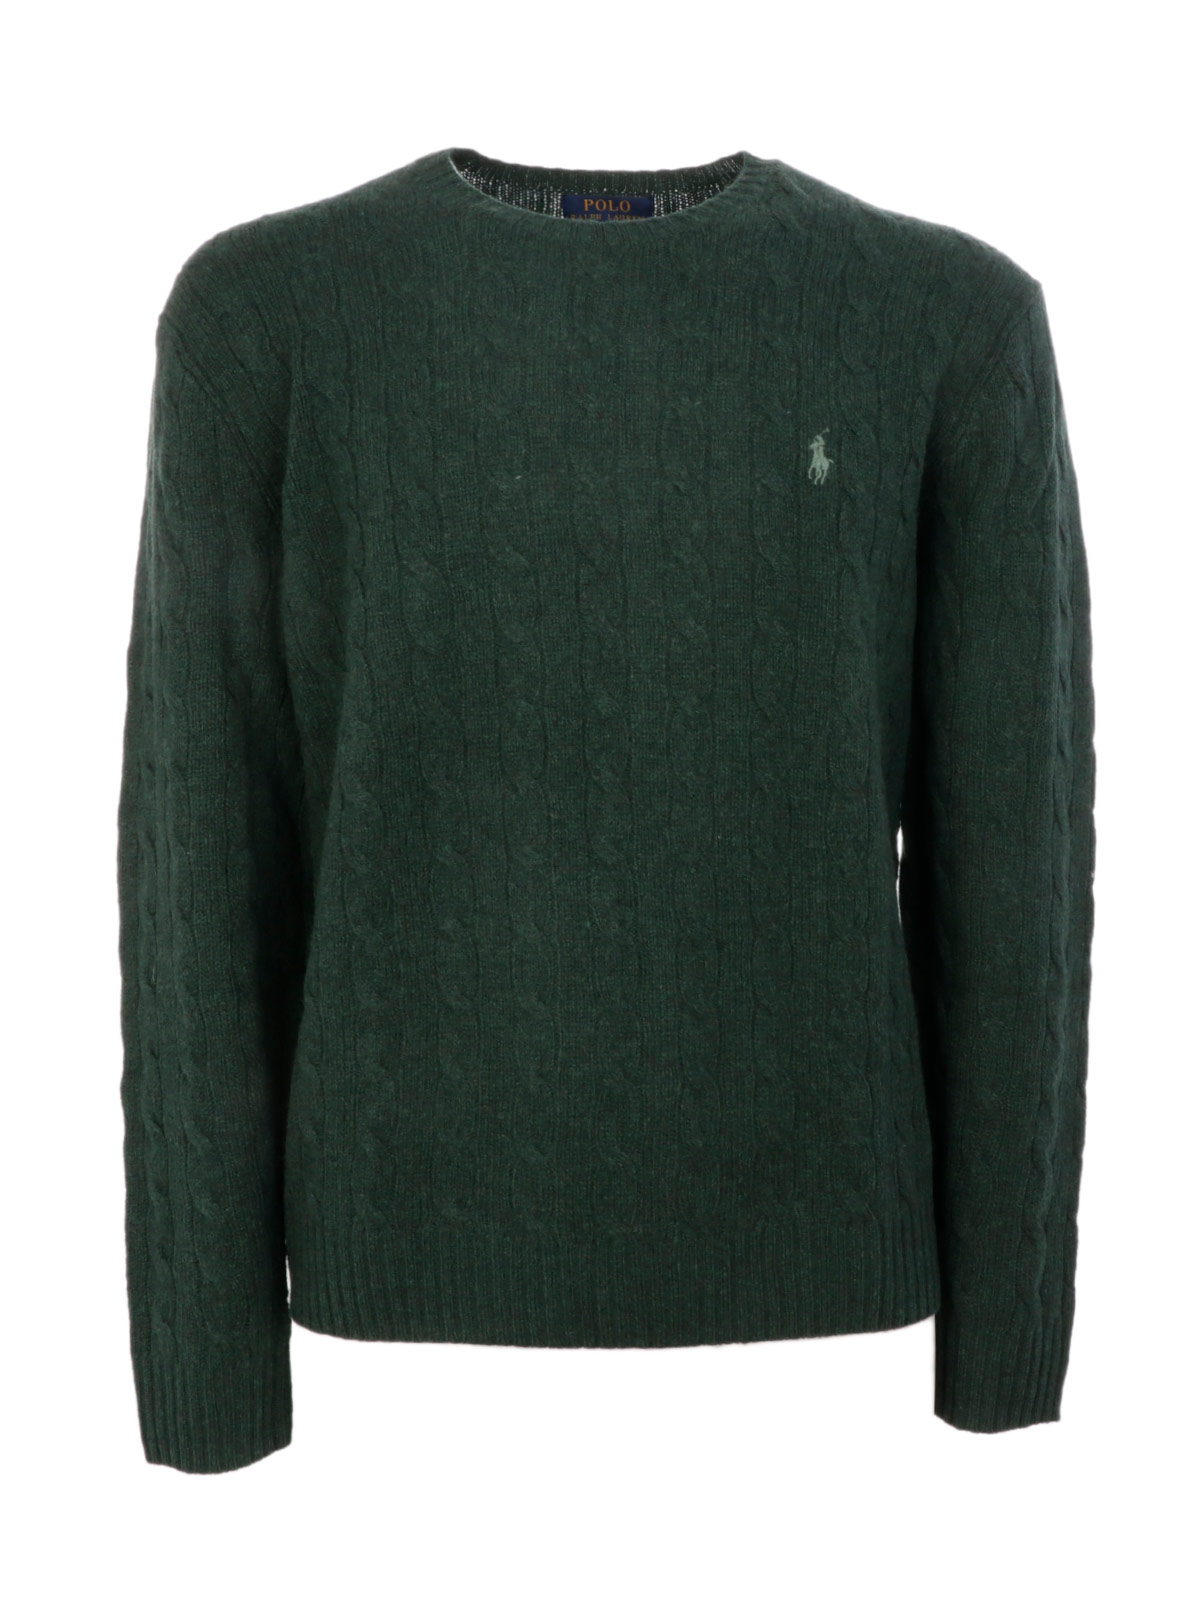 POLO RALPH LAUREN Men's Cabled Sweater 